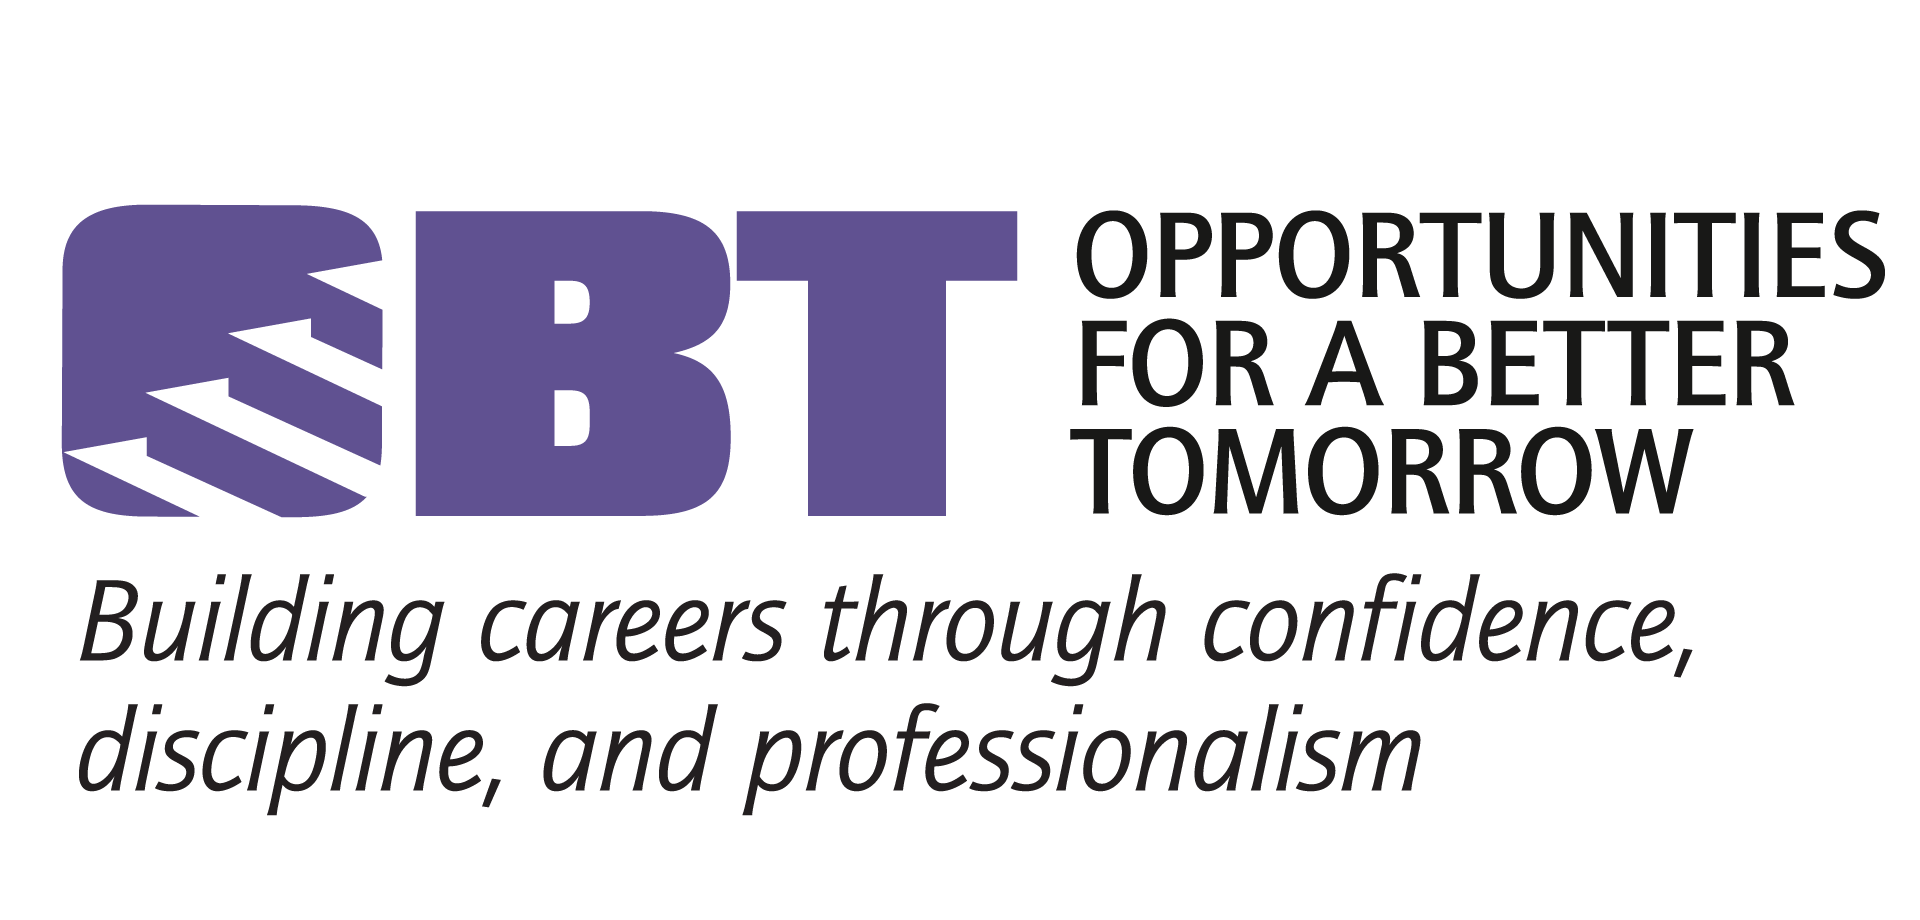 Opportunities for a Better Tomorrow - Logo 2.png